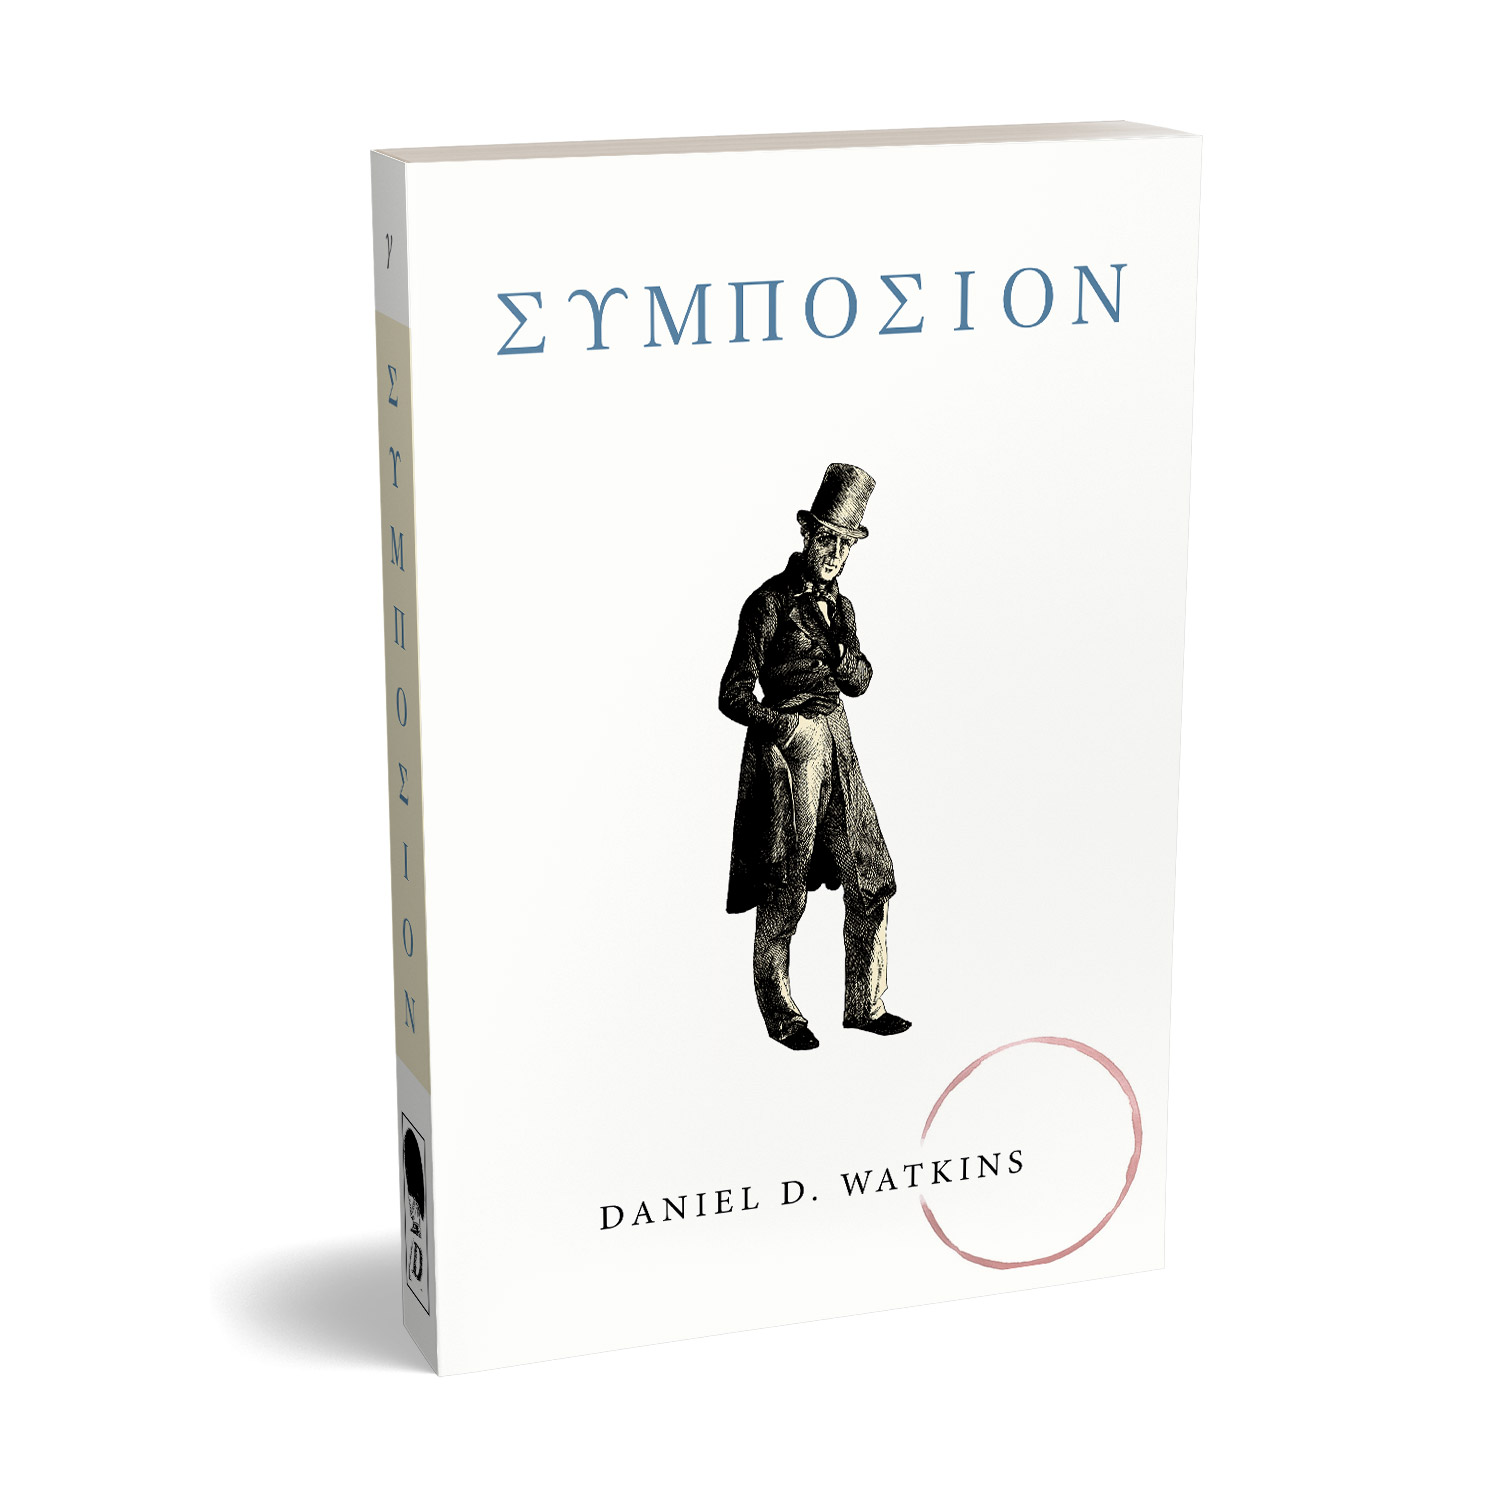 'Symposion' is a wildly esoteric three part novel. The author is Daniel C Watkins. The book cover design and interior formatting are by Mark Thomas. To learn more about what Mark could do for your book, please visit coverness.com.